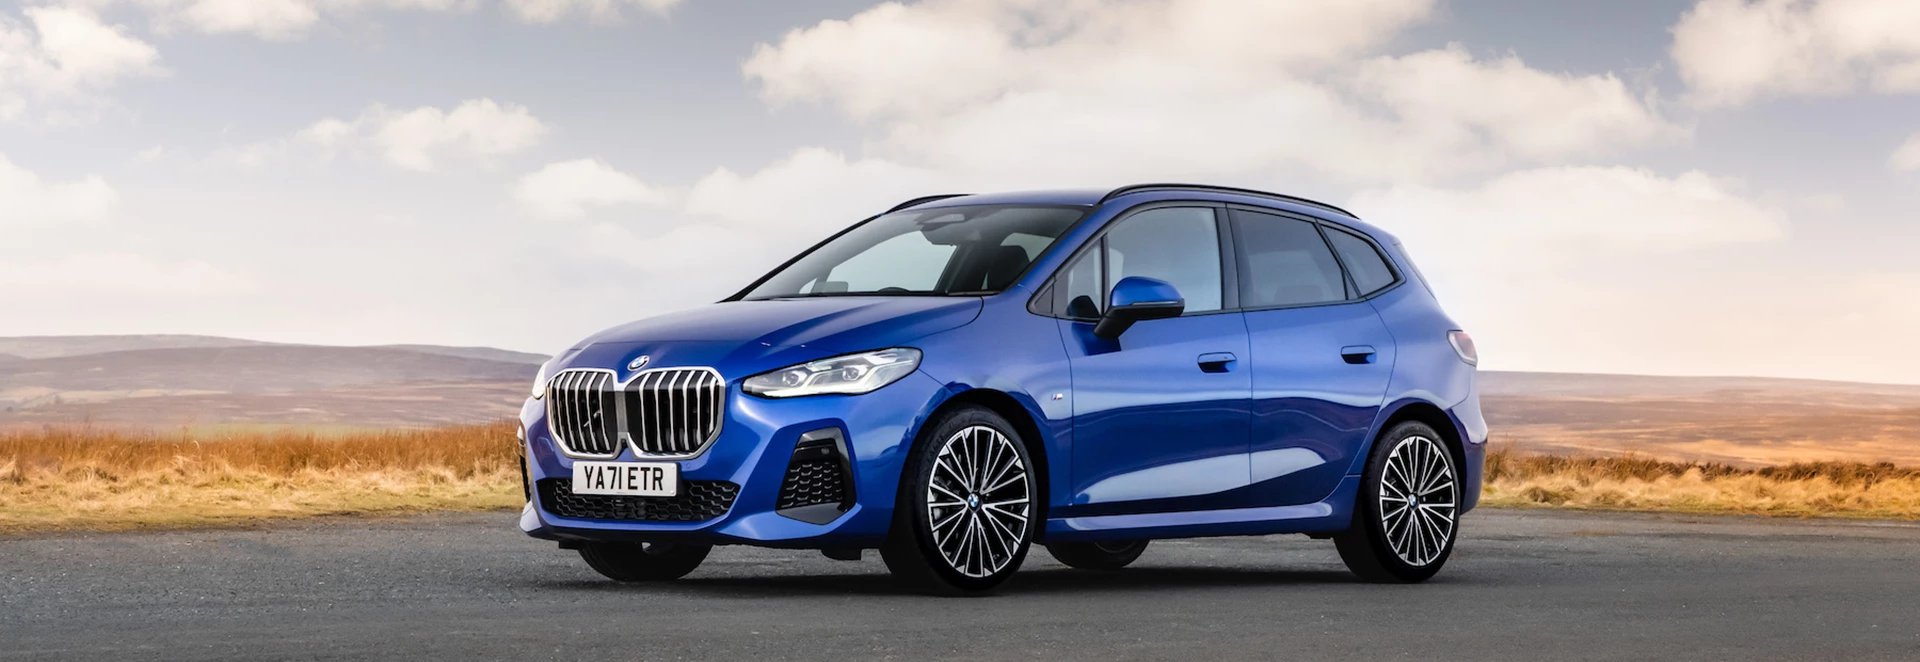 Buyer’s guide to the 2022 BMW 2 Series Active Tourer 